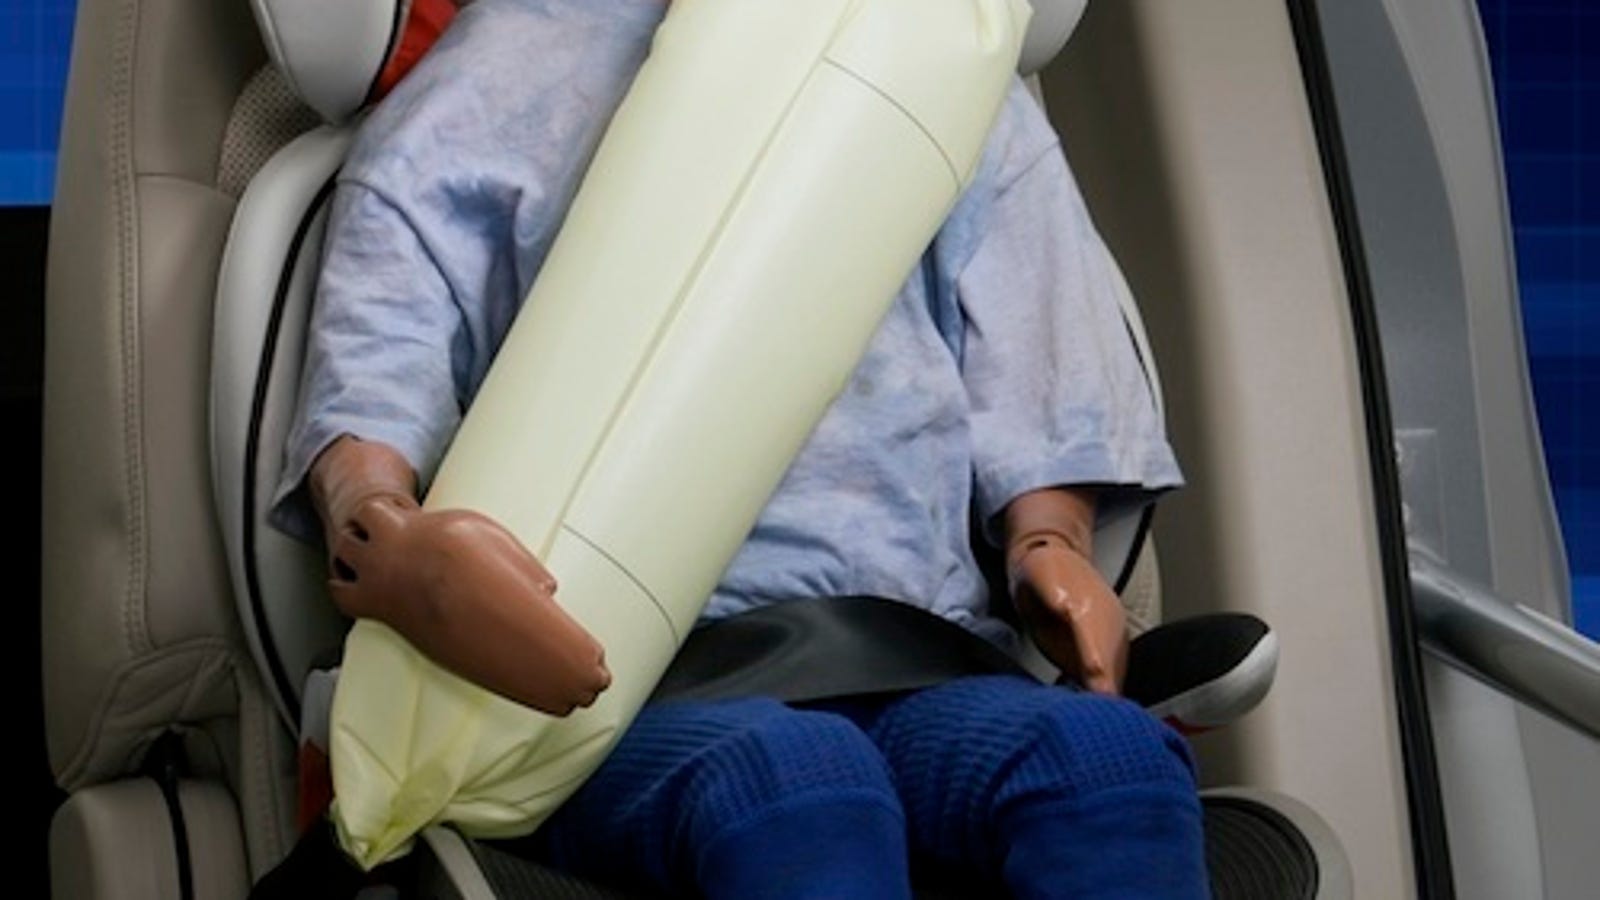 Ford Unveils Inflatable Seat Belt...You Know, For Kids!